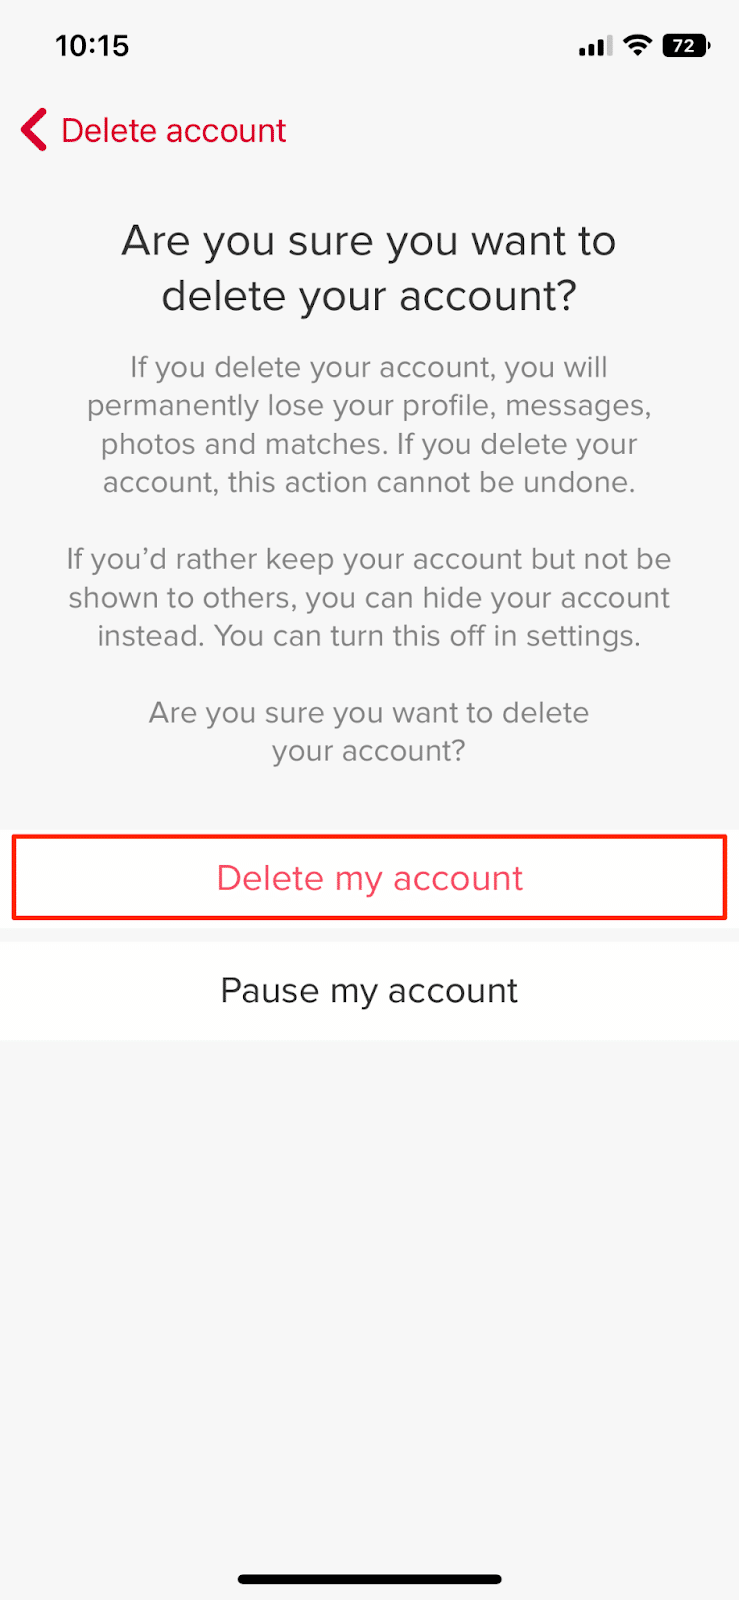 Choose the Delete My Account option to confirm